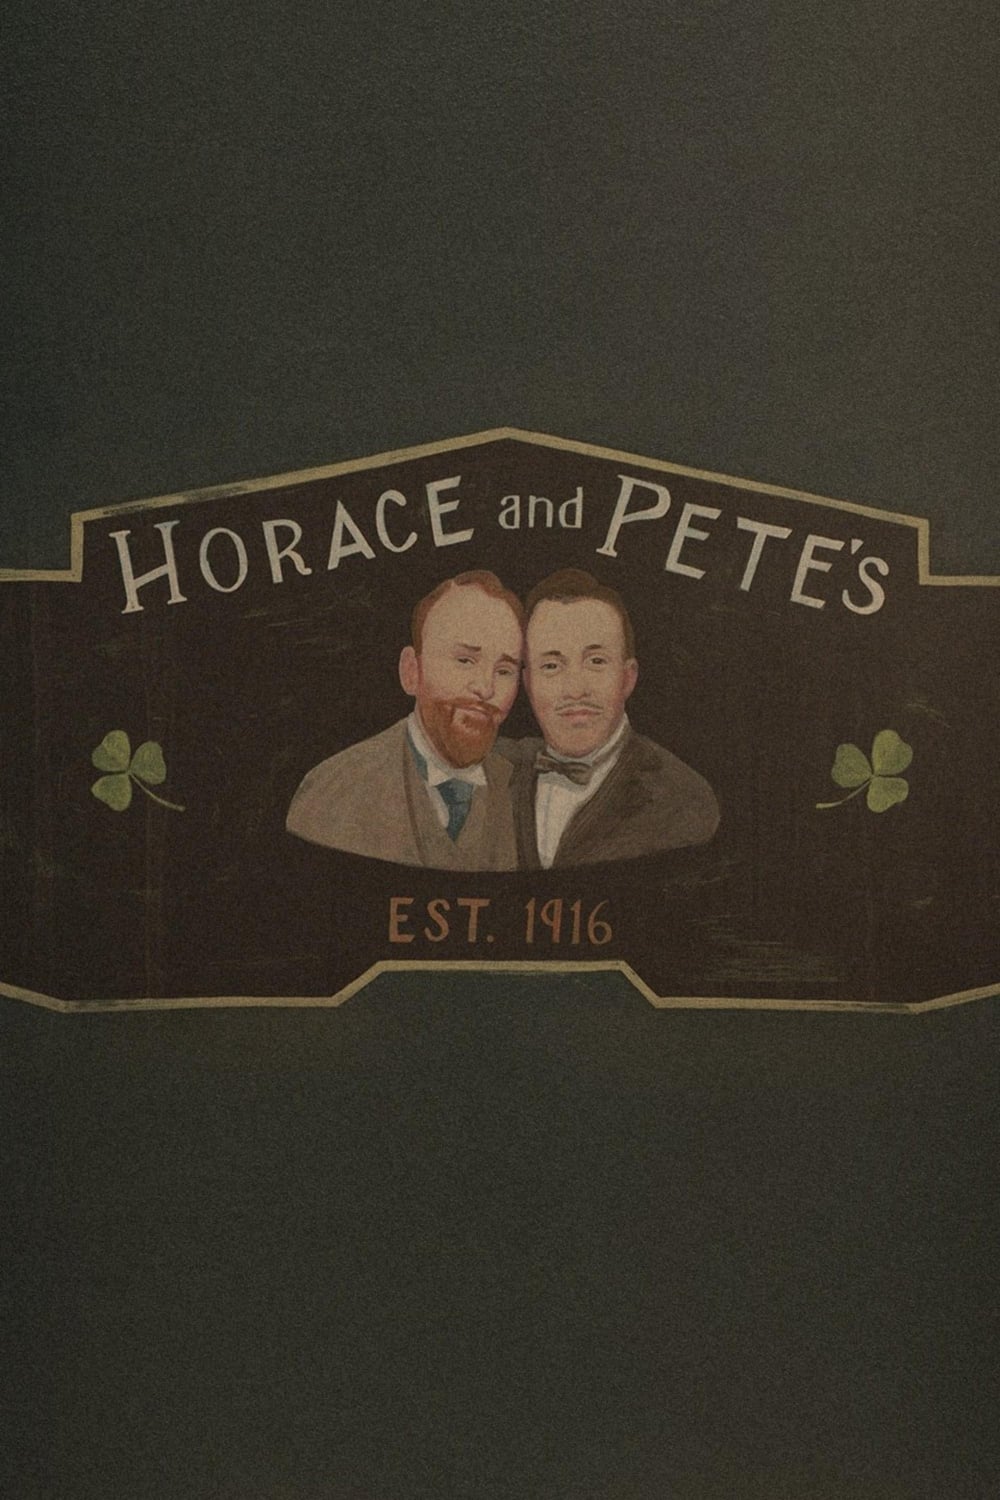 Horace and Pete (2016)